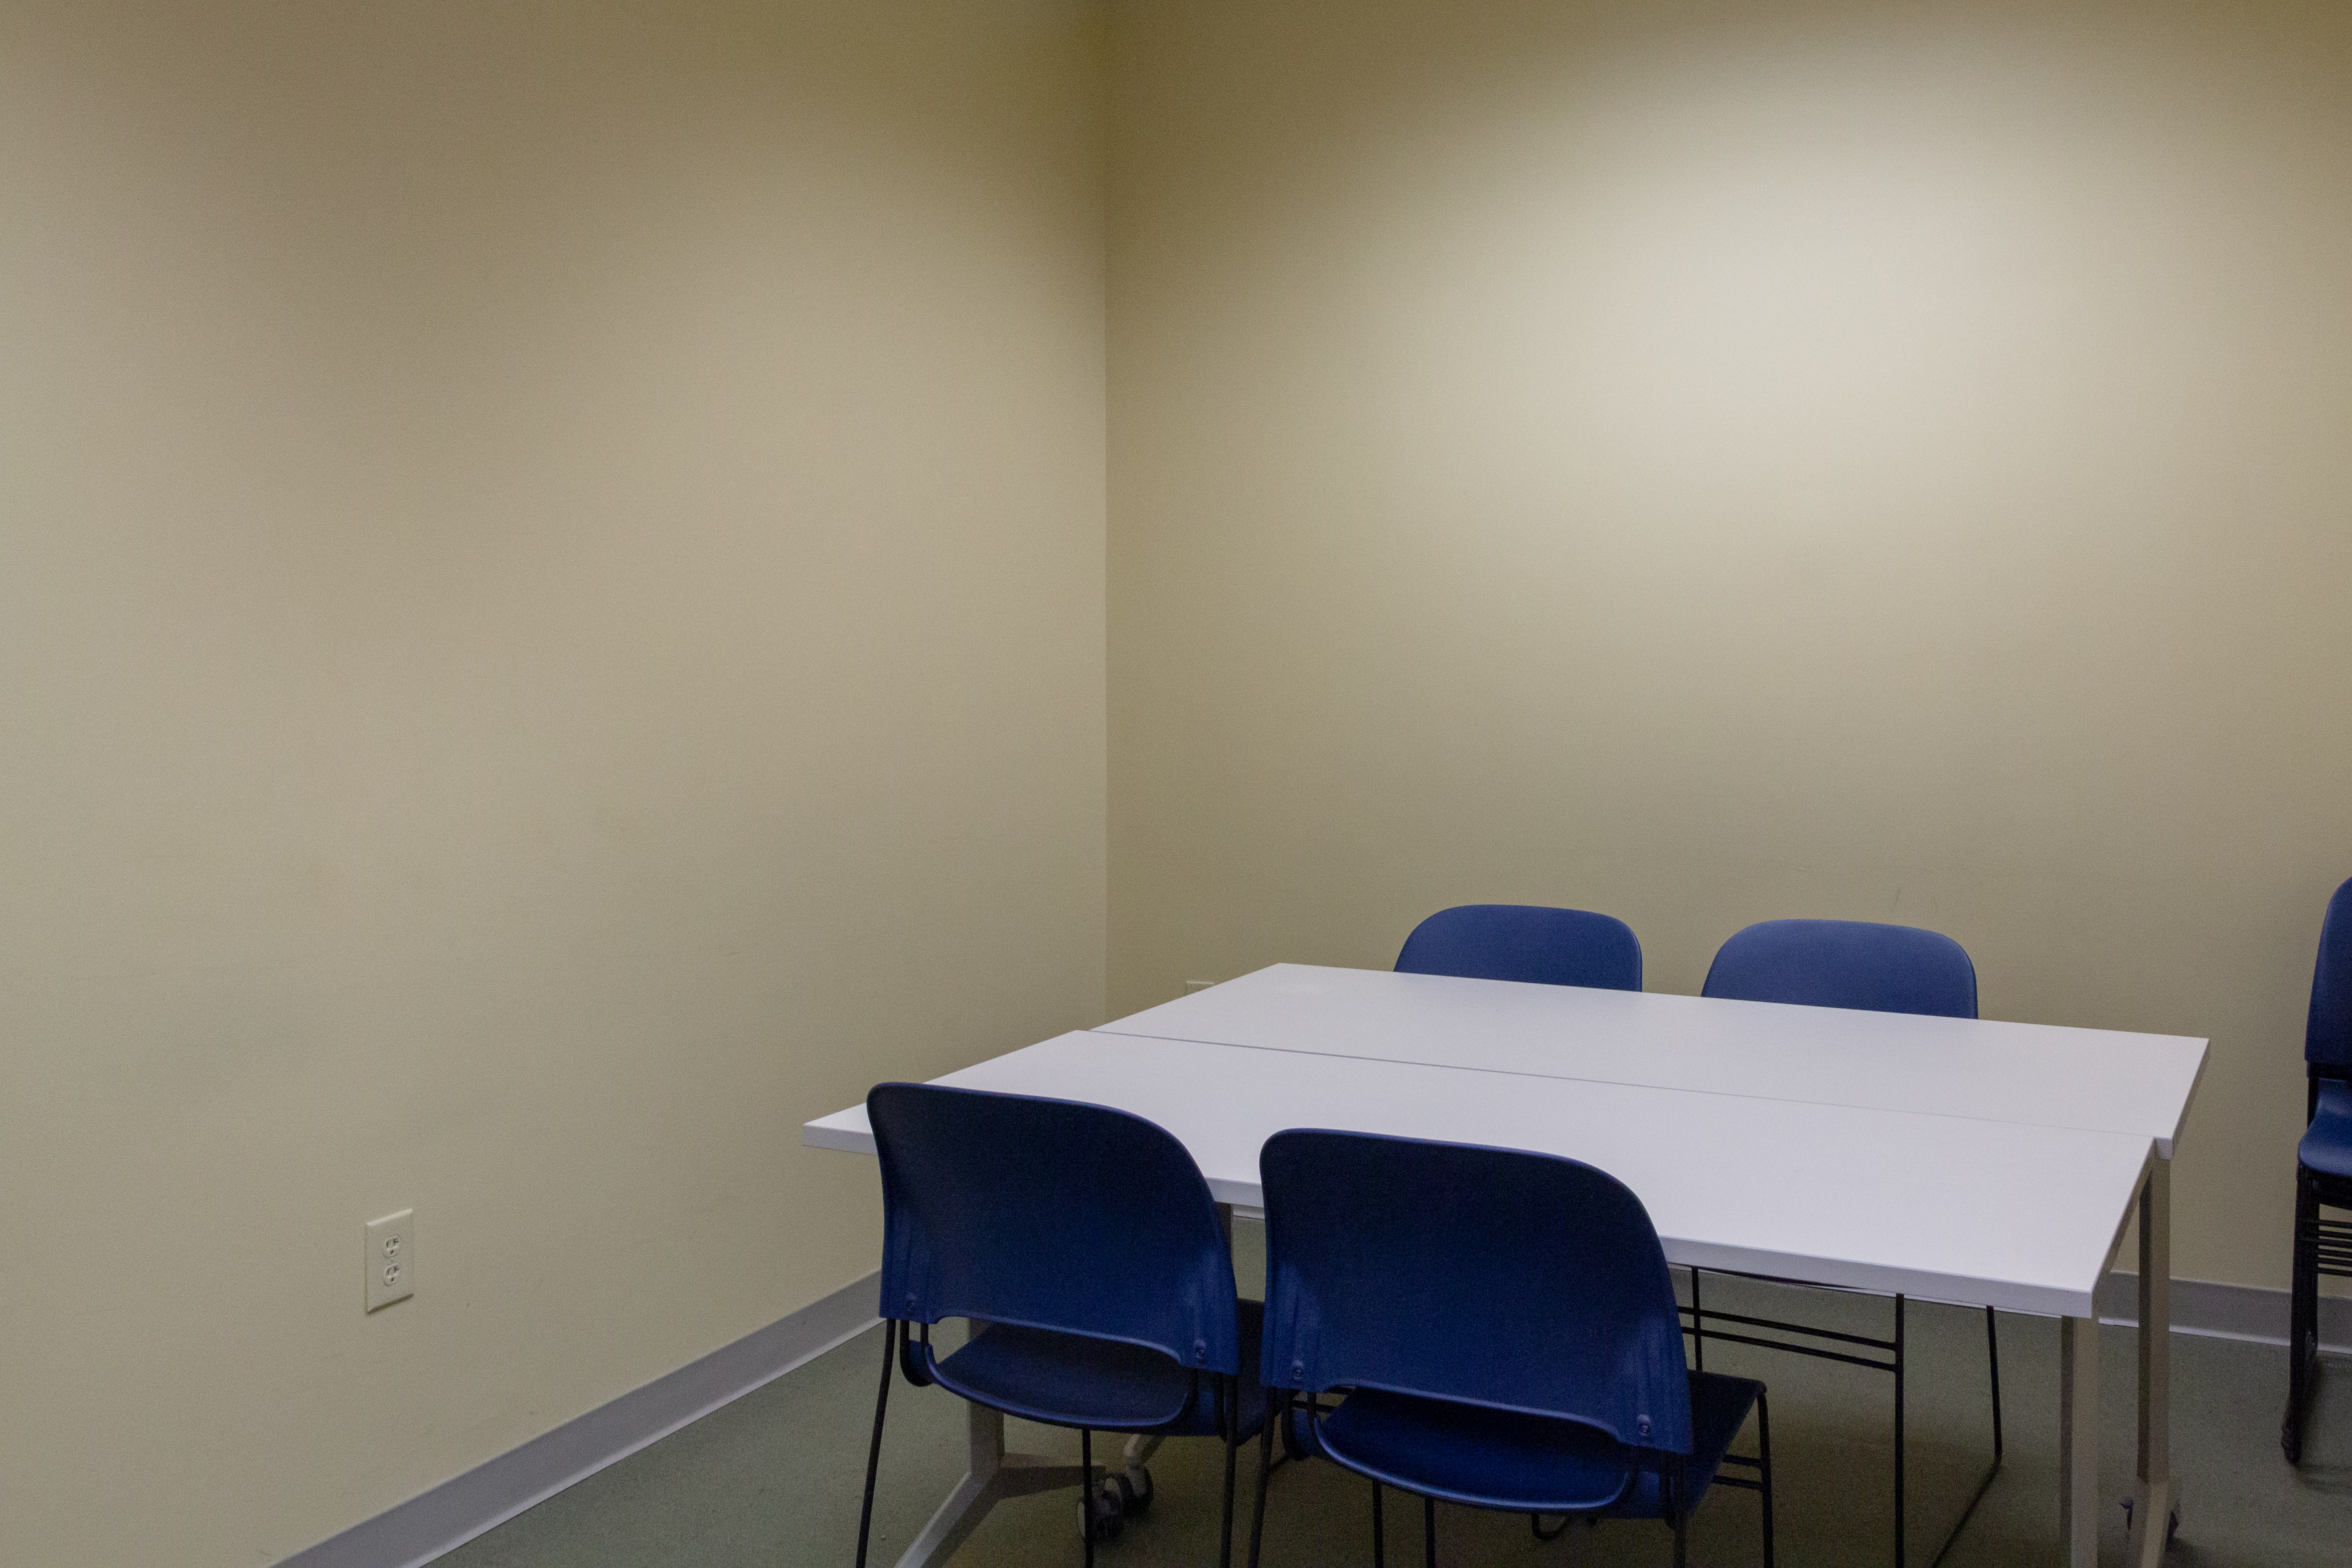 Meeting Room 121 at Argyle Branch